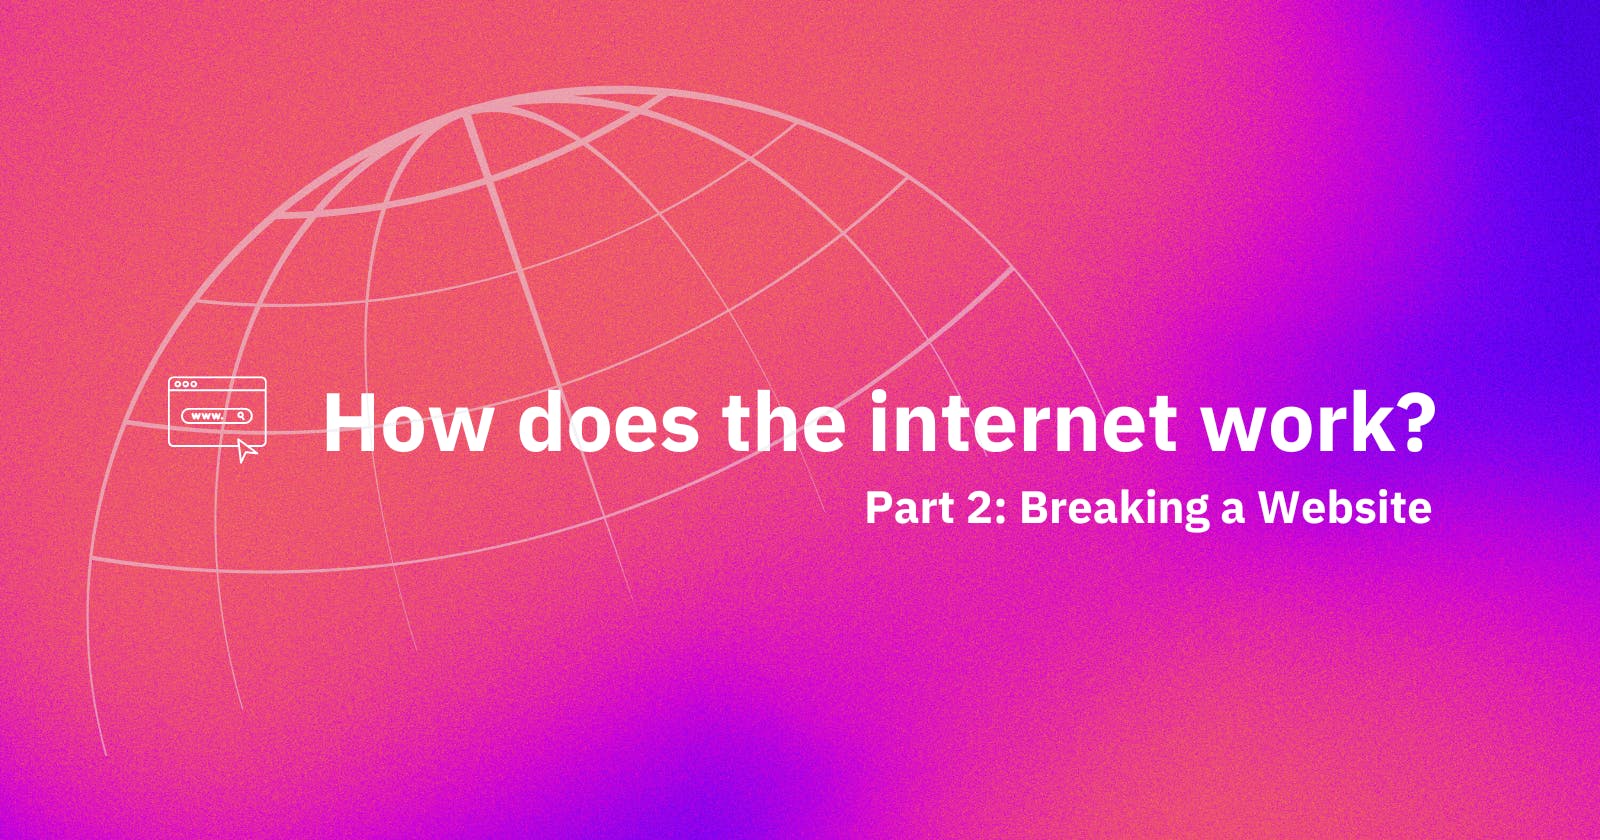 How Does the Internet Work? Part 2 - Breaking a Website